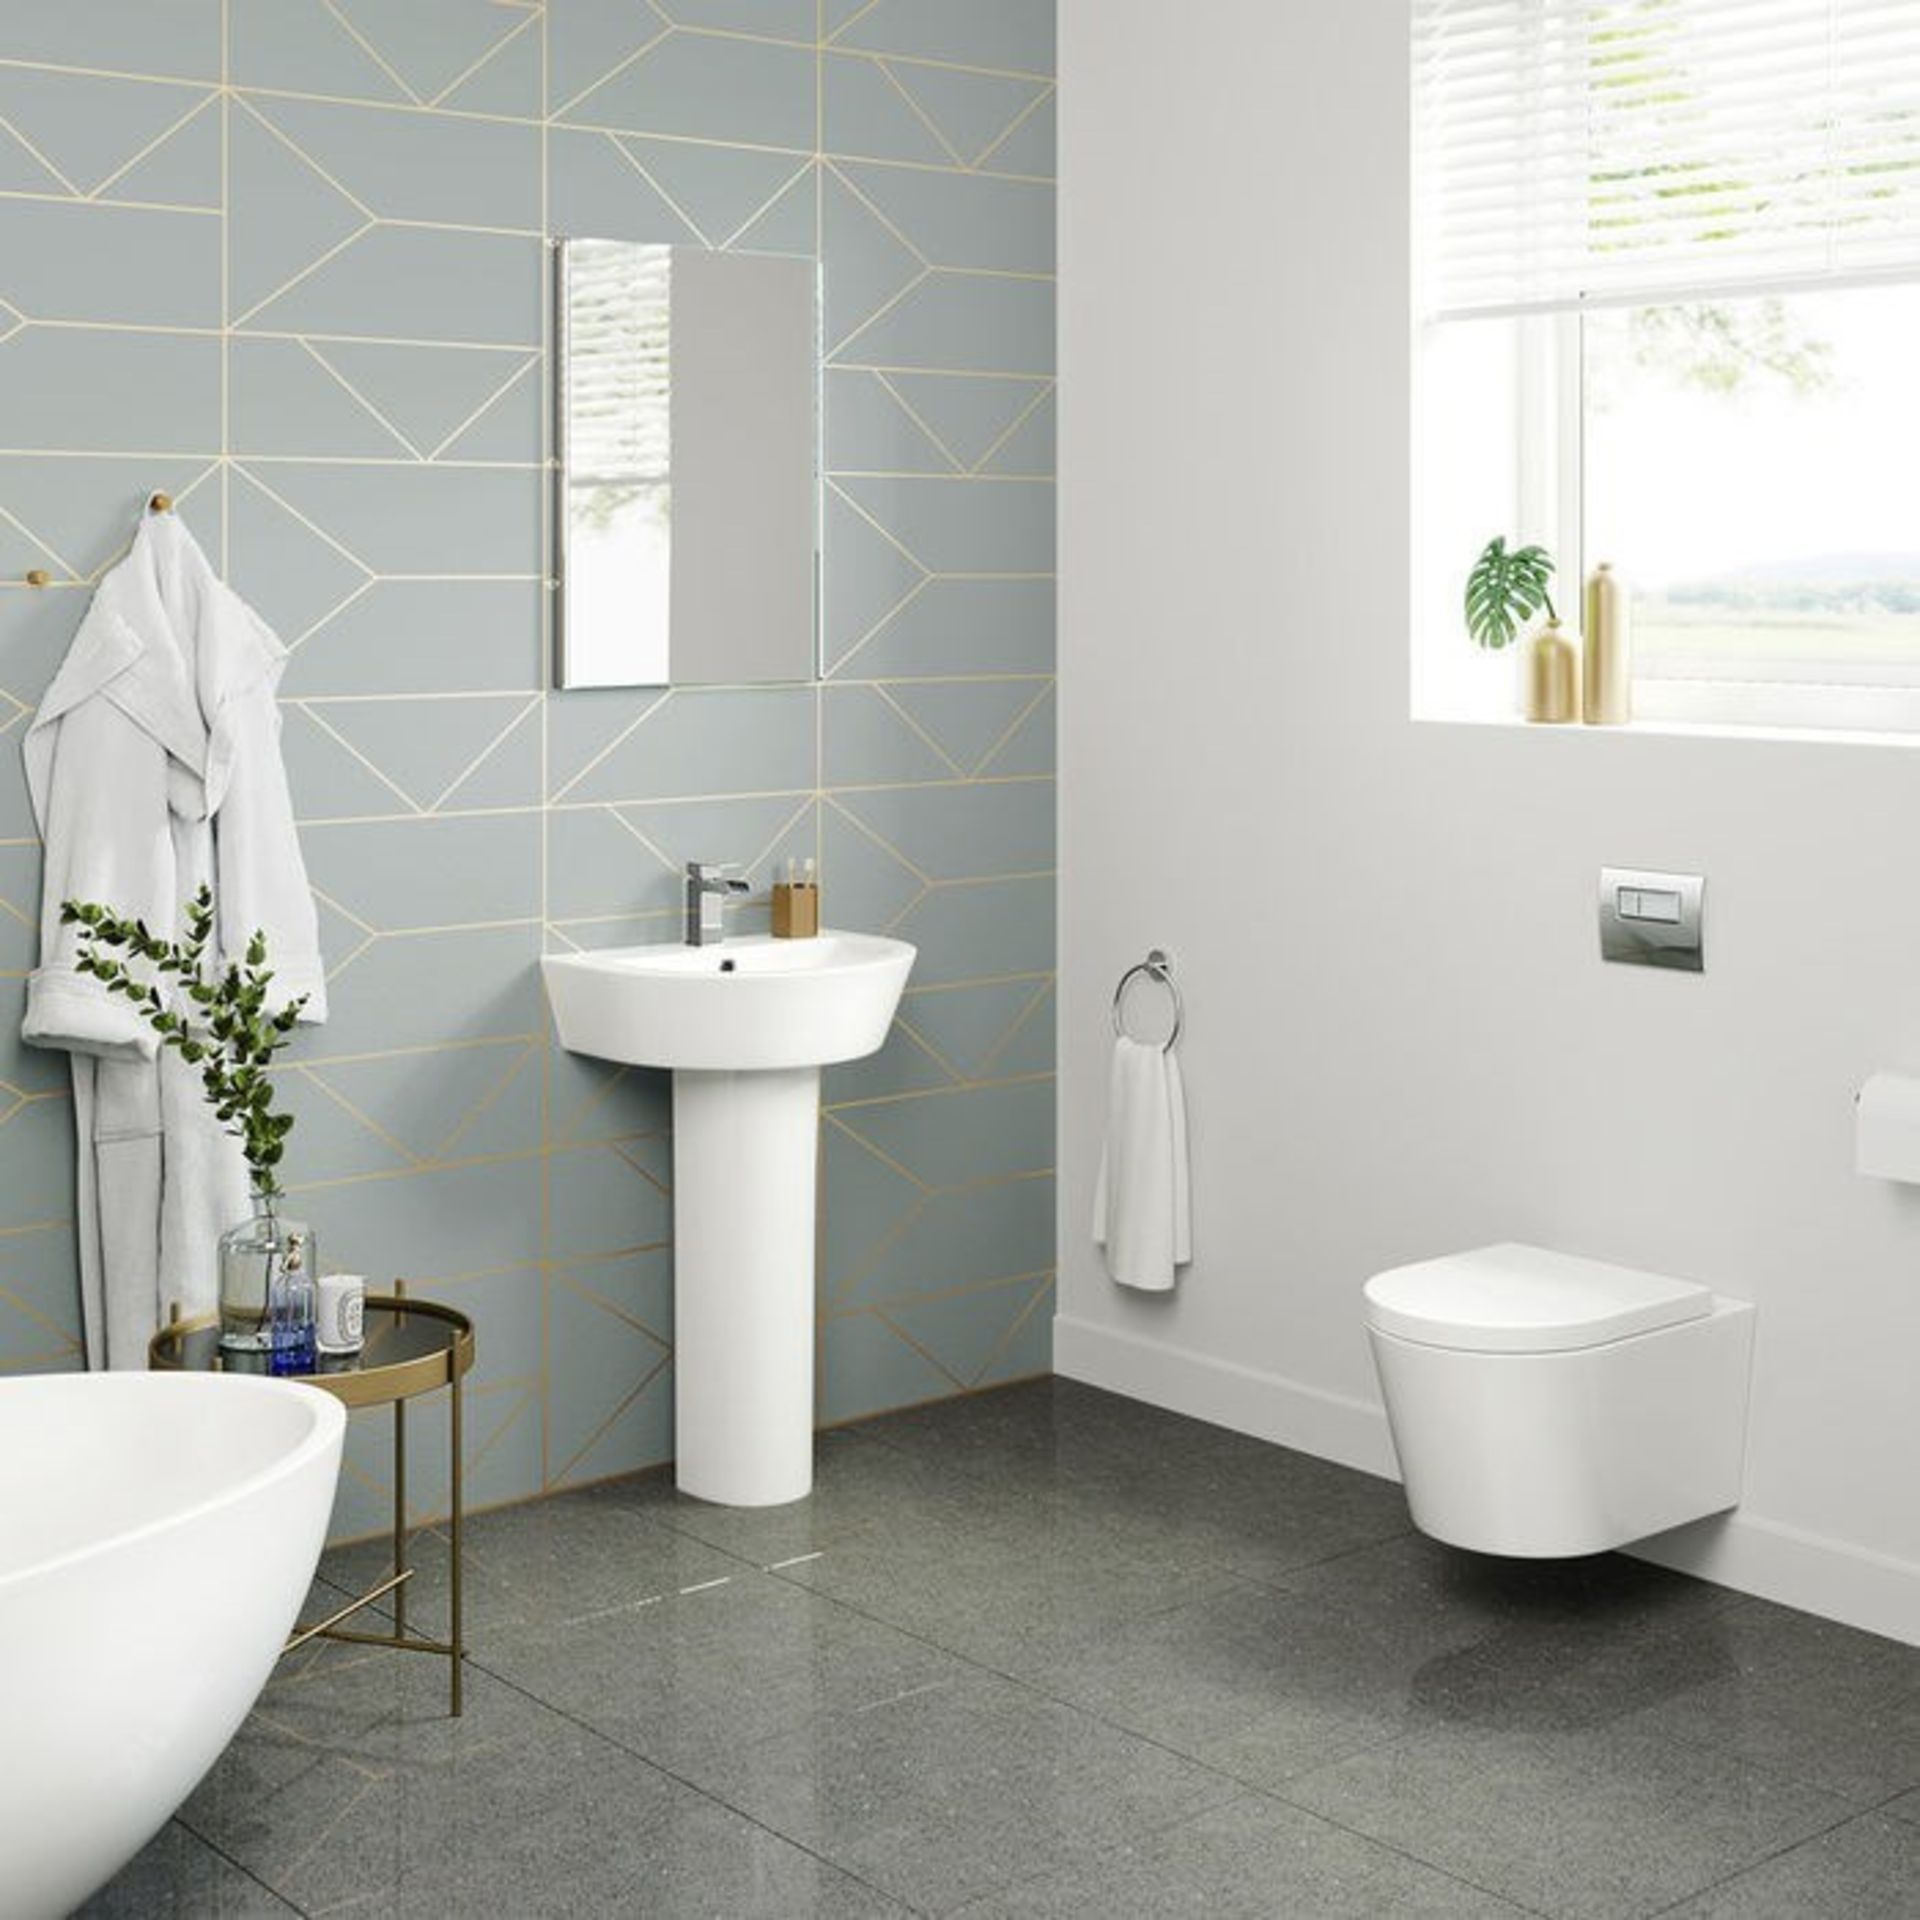 NEW & BOXED Lyon II Wall Hung Toilet inc Luxury Soft Close Seat.RRP £349.99 each.We love this ... - Image 2 of 2